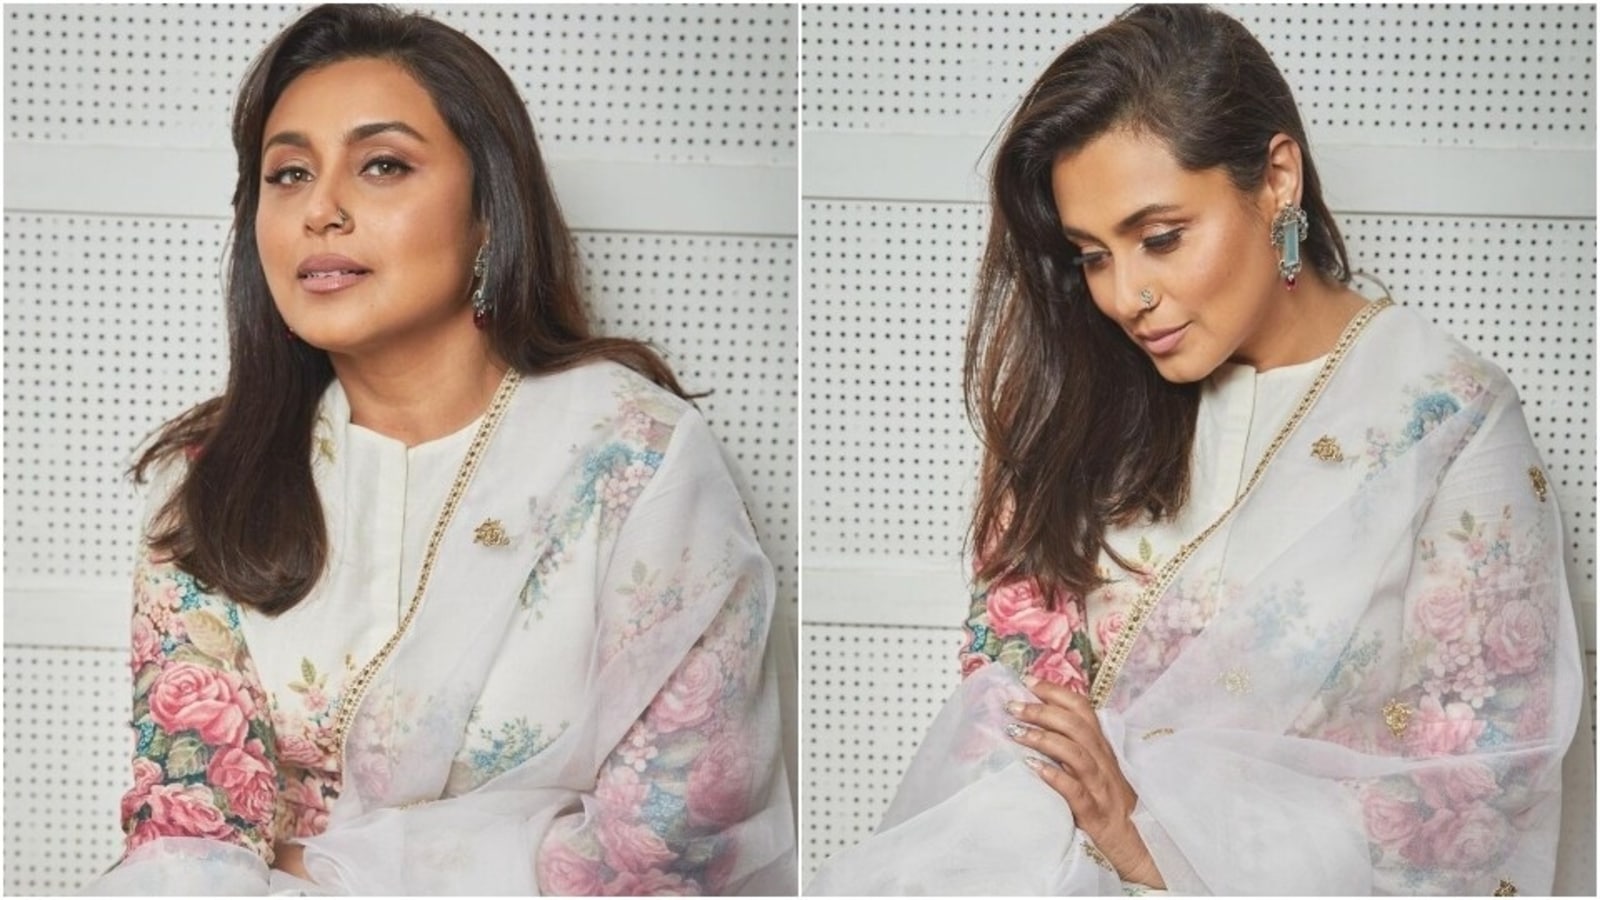 Rani Mukerji is a vision in white floral Sabyasachi suit for Bunty Aur  Babli 2 promotions | Fashion Trends - Hindustan Times